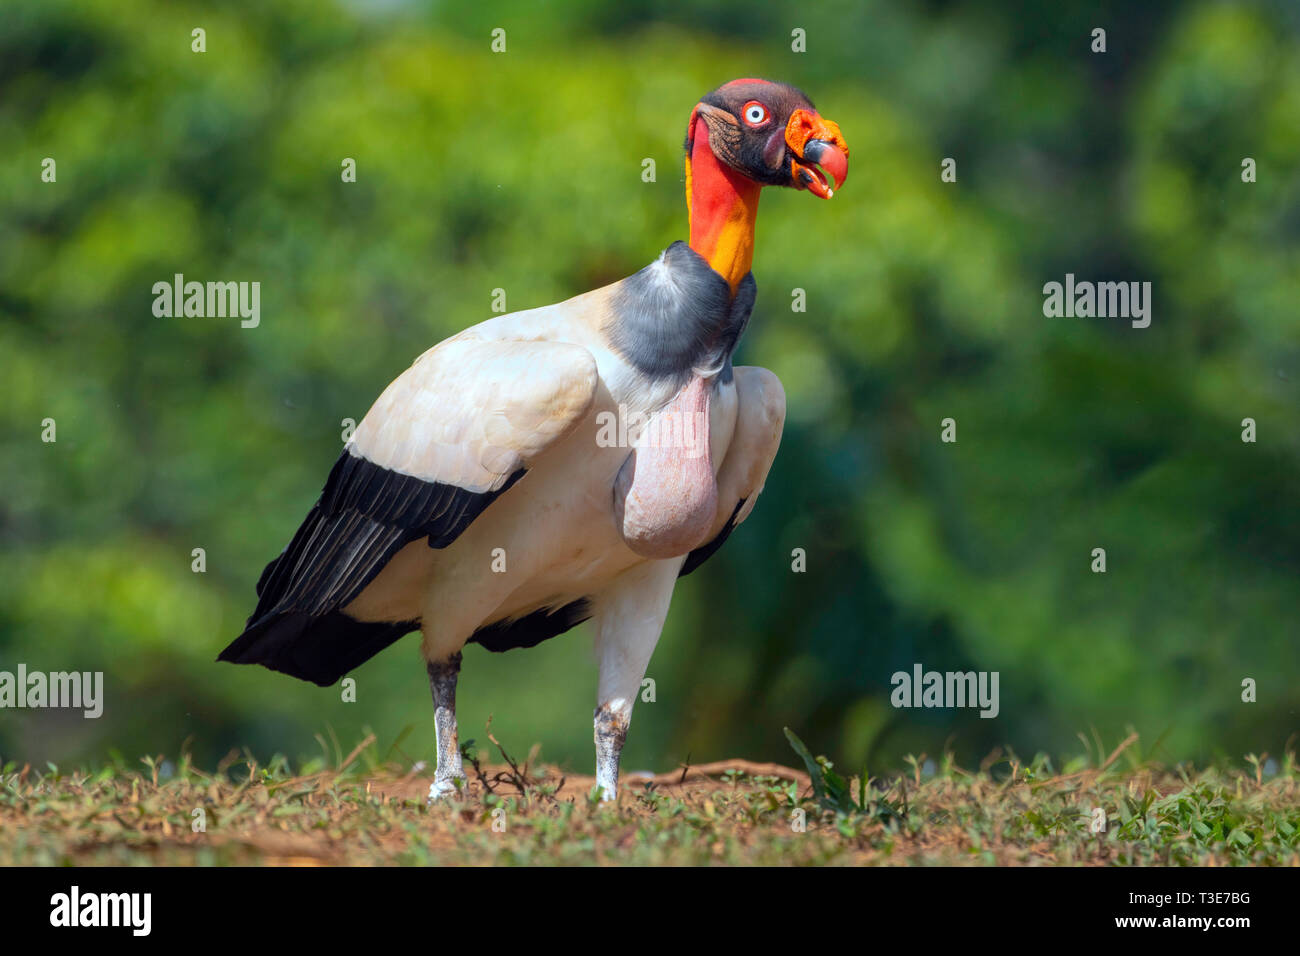 King Vulture  Sarcoramphus papa Pital, Alajuela Province, Costa Rica 16 March 2019       Adult with full crop.       Cathartidae Stock Photo